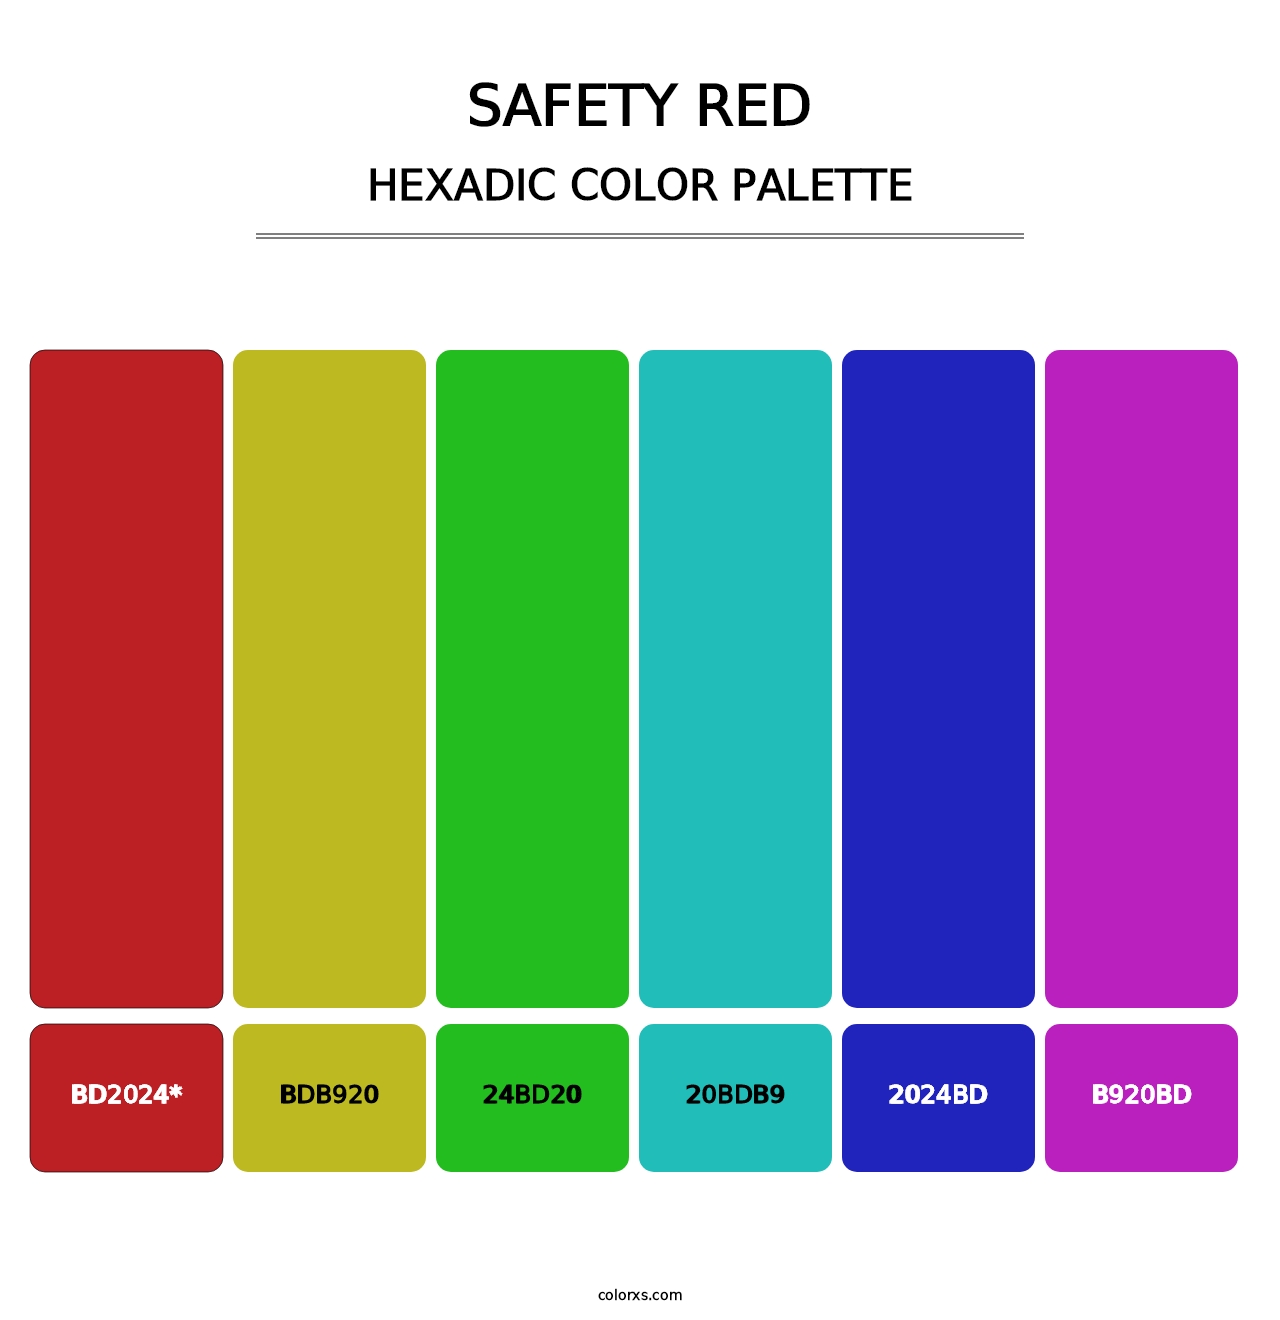 Safety Red - Hexadic Color Palette